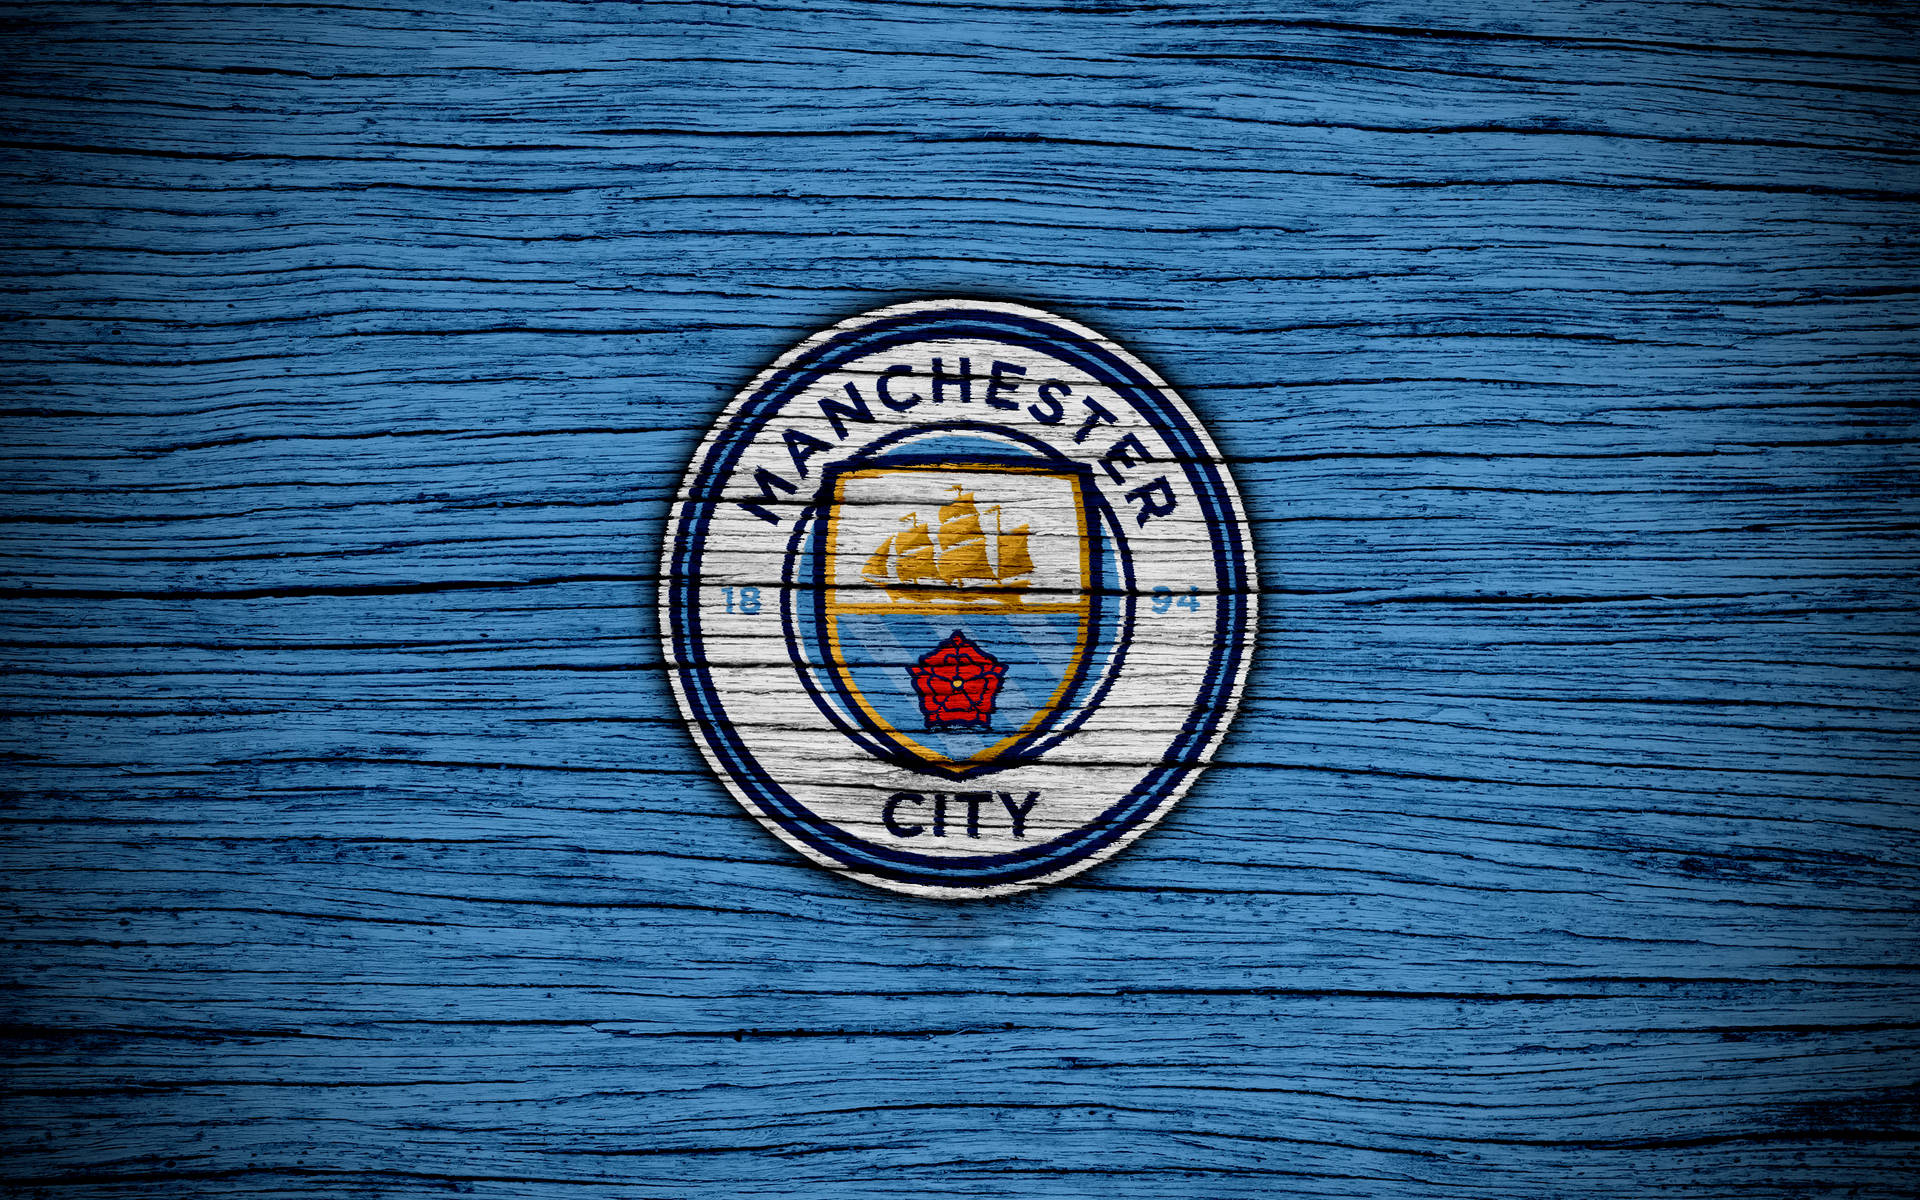 10 4K Manchester City FC Wallpapers  Background Images